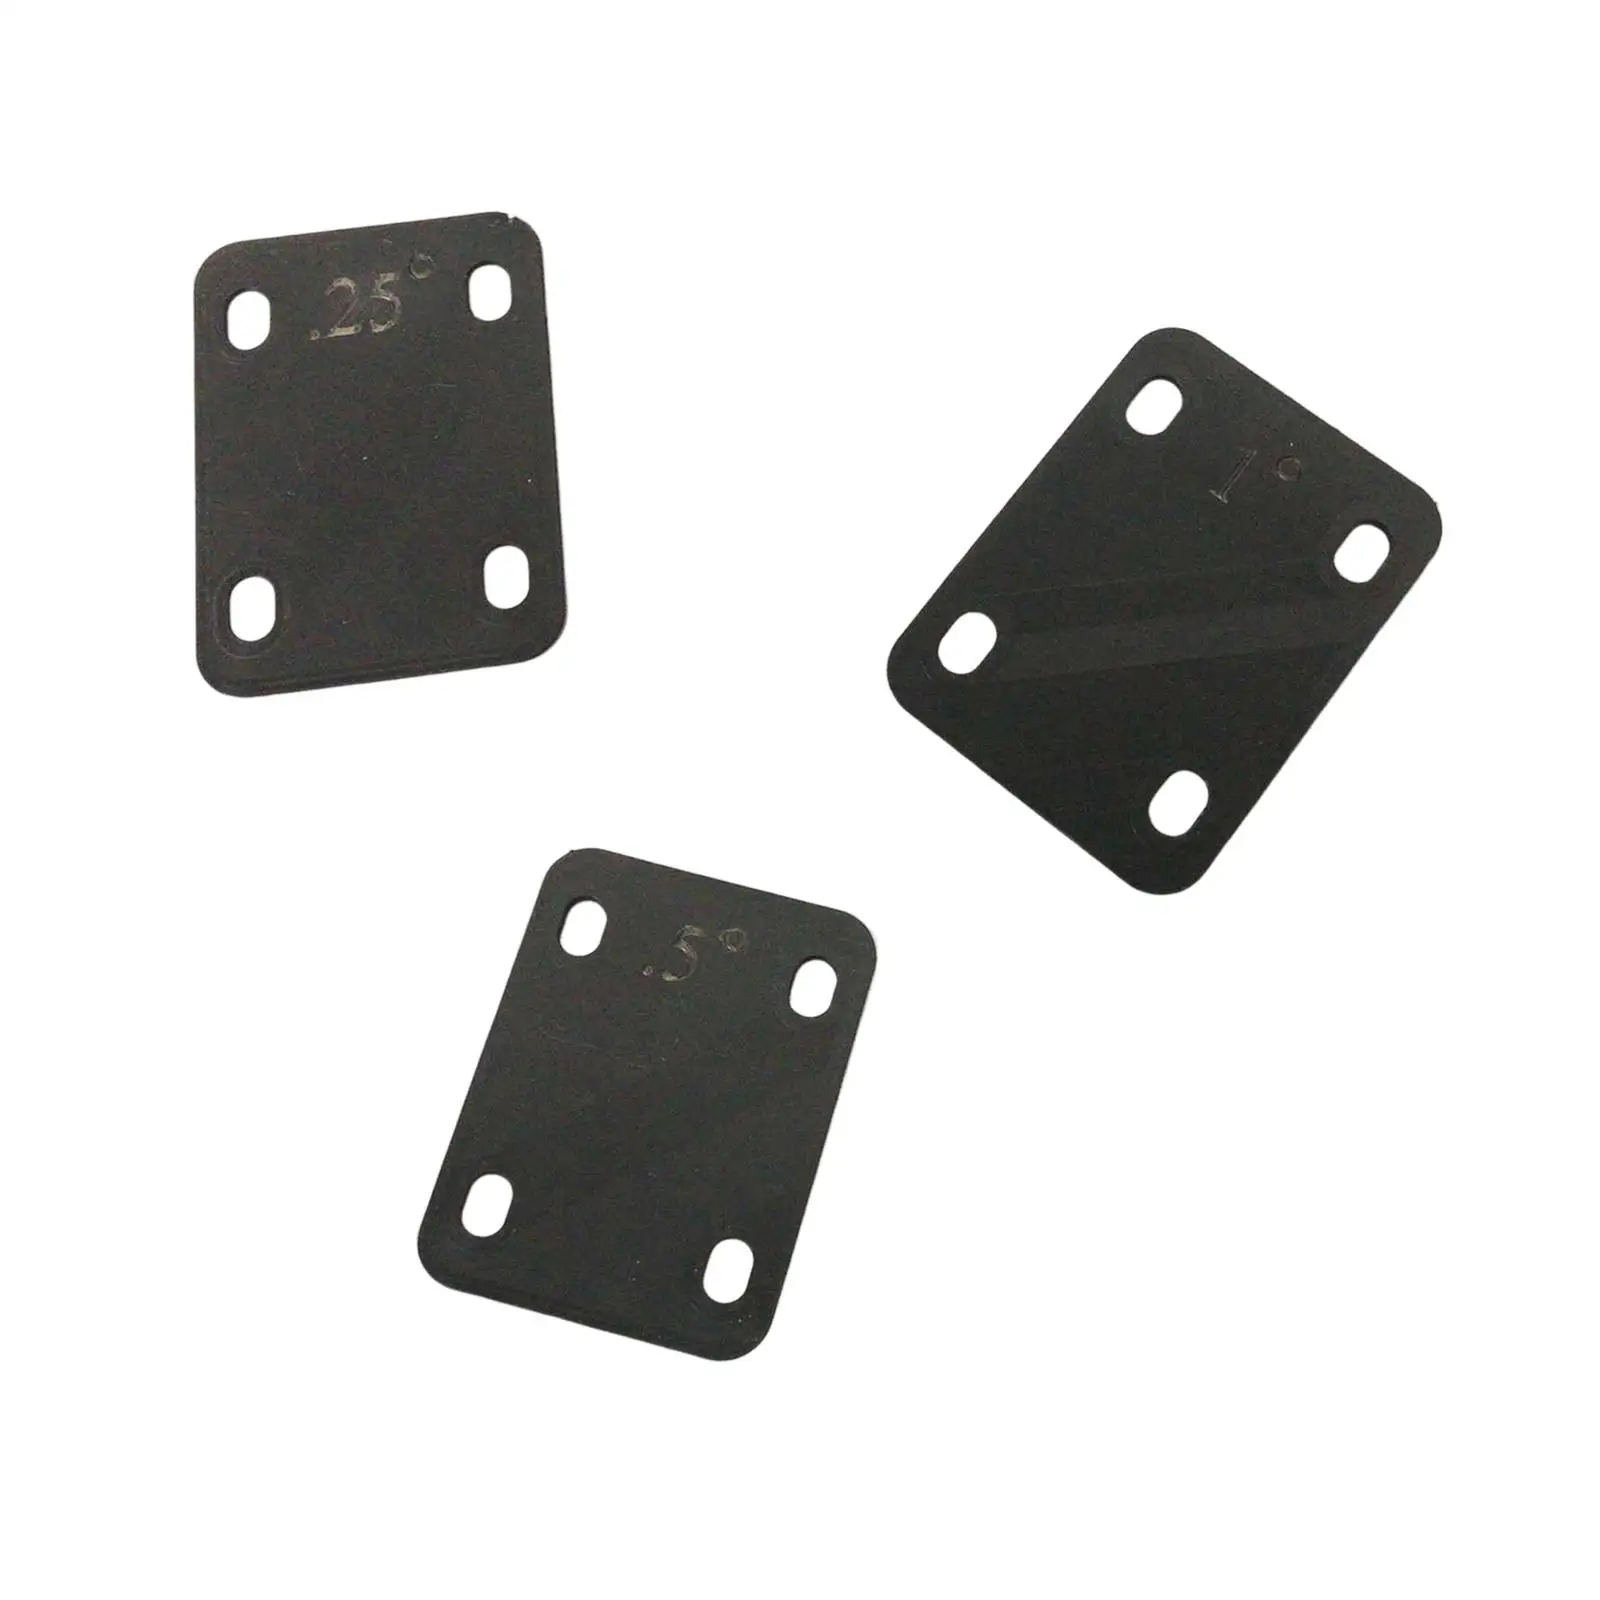 3 Pieces 4 Holes Neck Plate Gasket Accessories Replacement Part for guitar masters